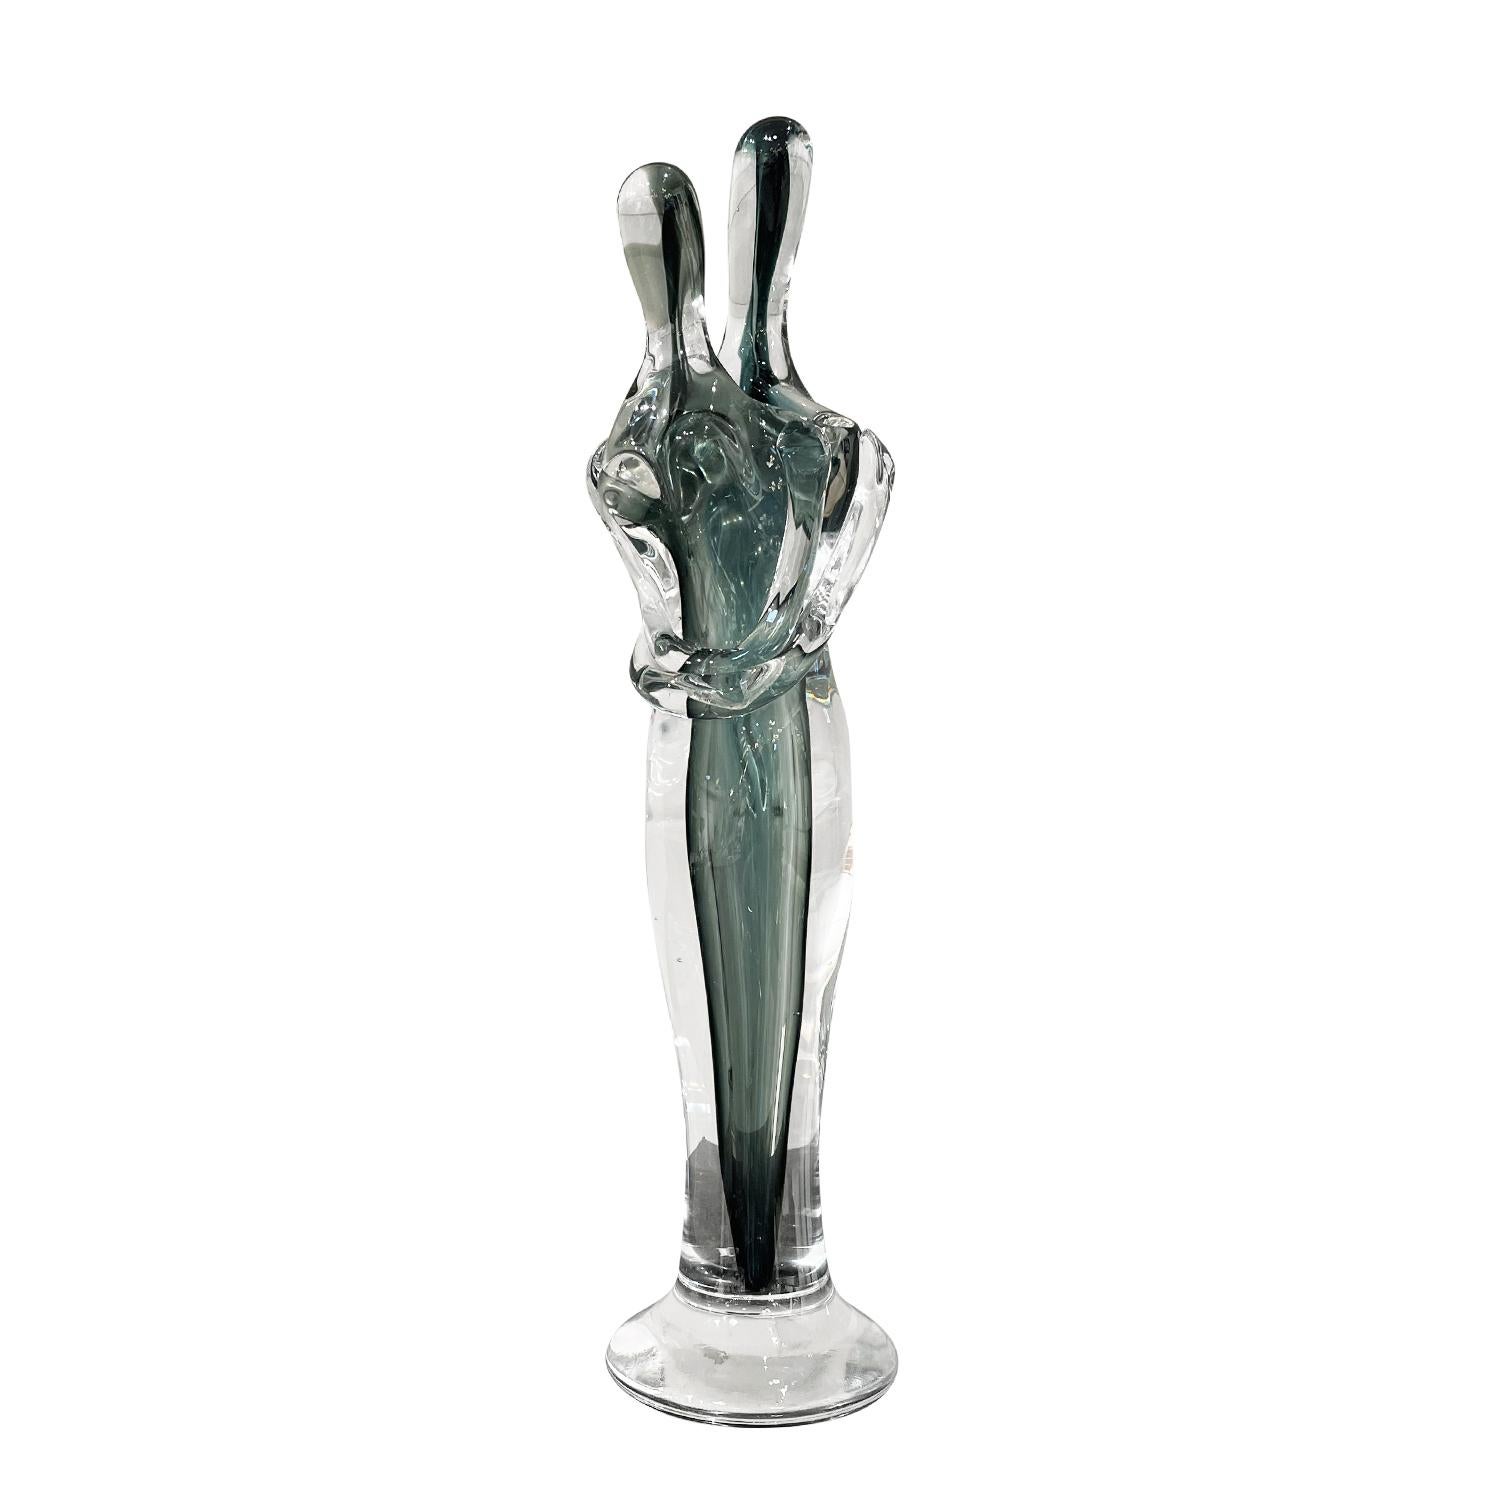 A green-white, vintage Mid-Century Modern Italian sculpture of a hugging couple made of hand blown Murano glass, in good condition. The detailed décor piece represents a woman and a man. Wear consistent with age and use. circa 1950 - 1970,